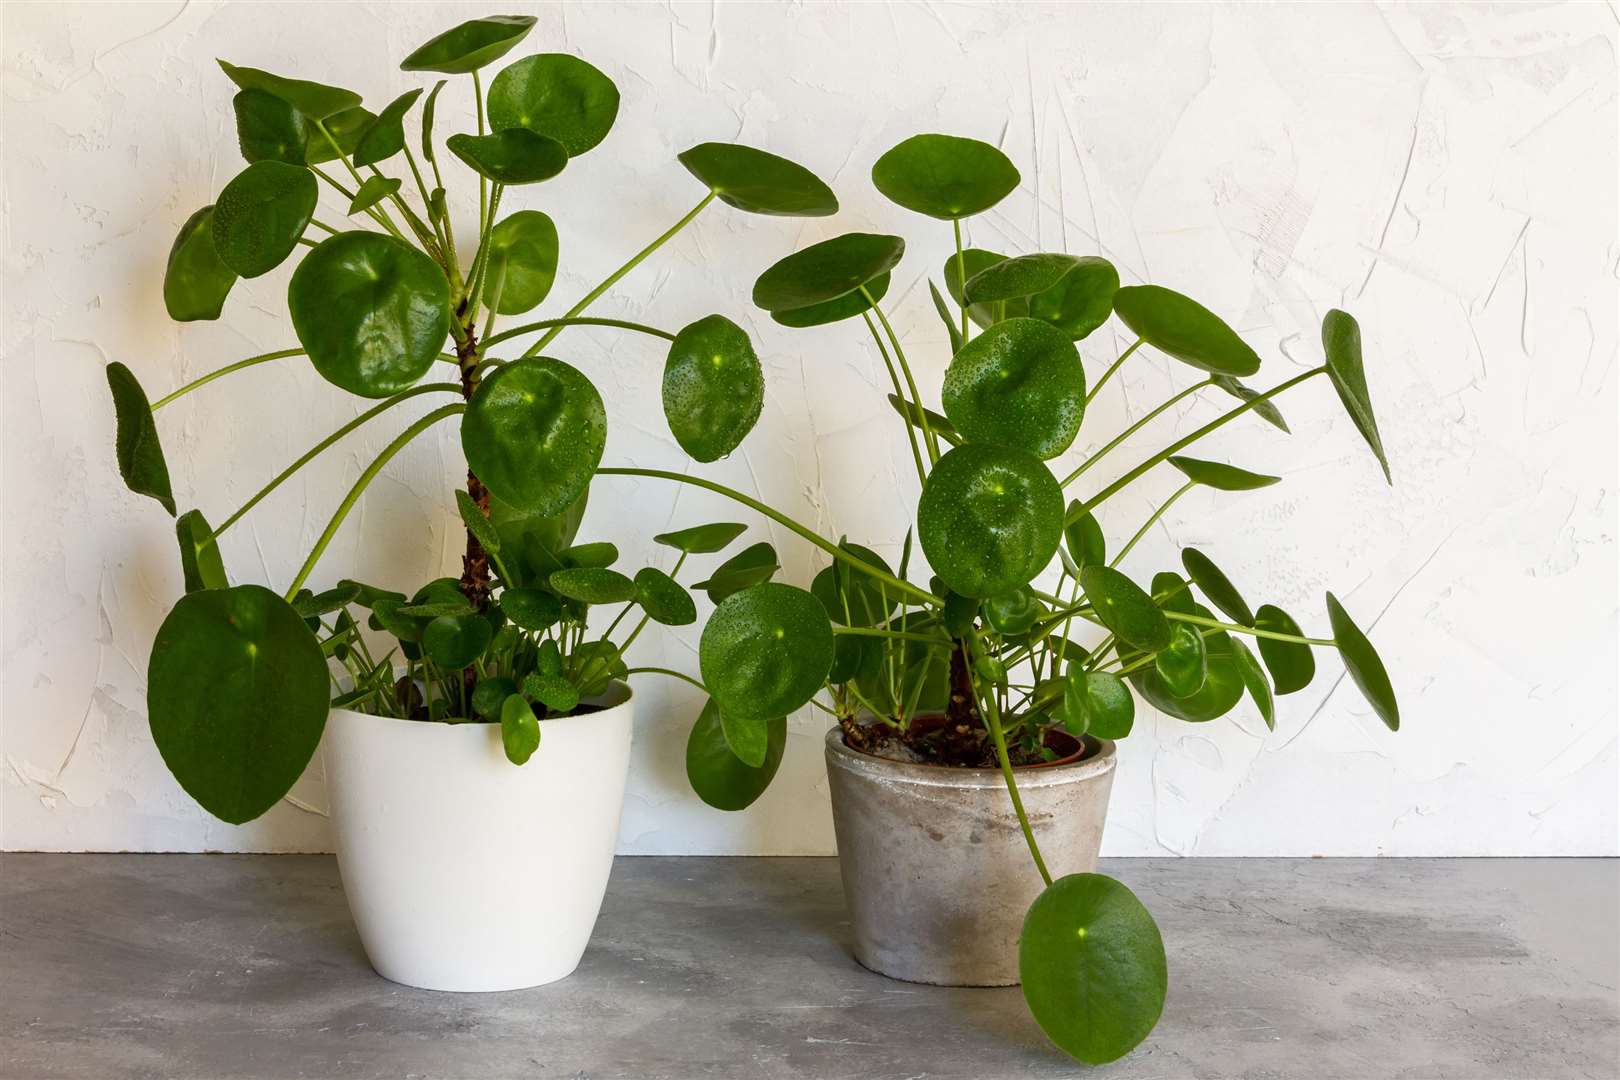 Pilea plants and their pilea 'babies' growing round the base of the main plant. Picture: iStock/PA